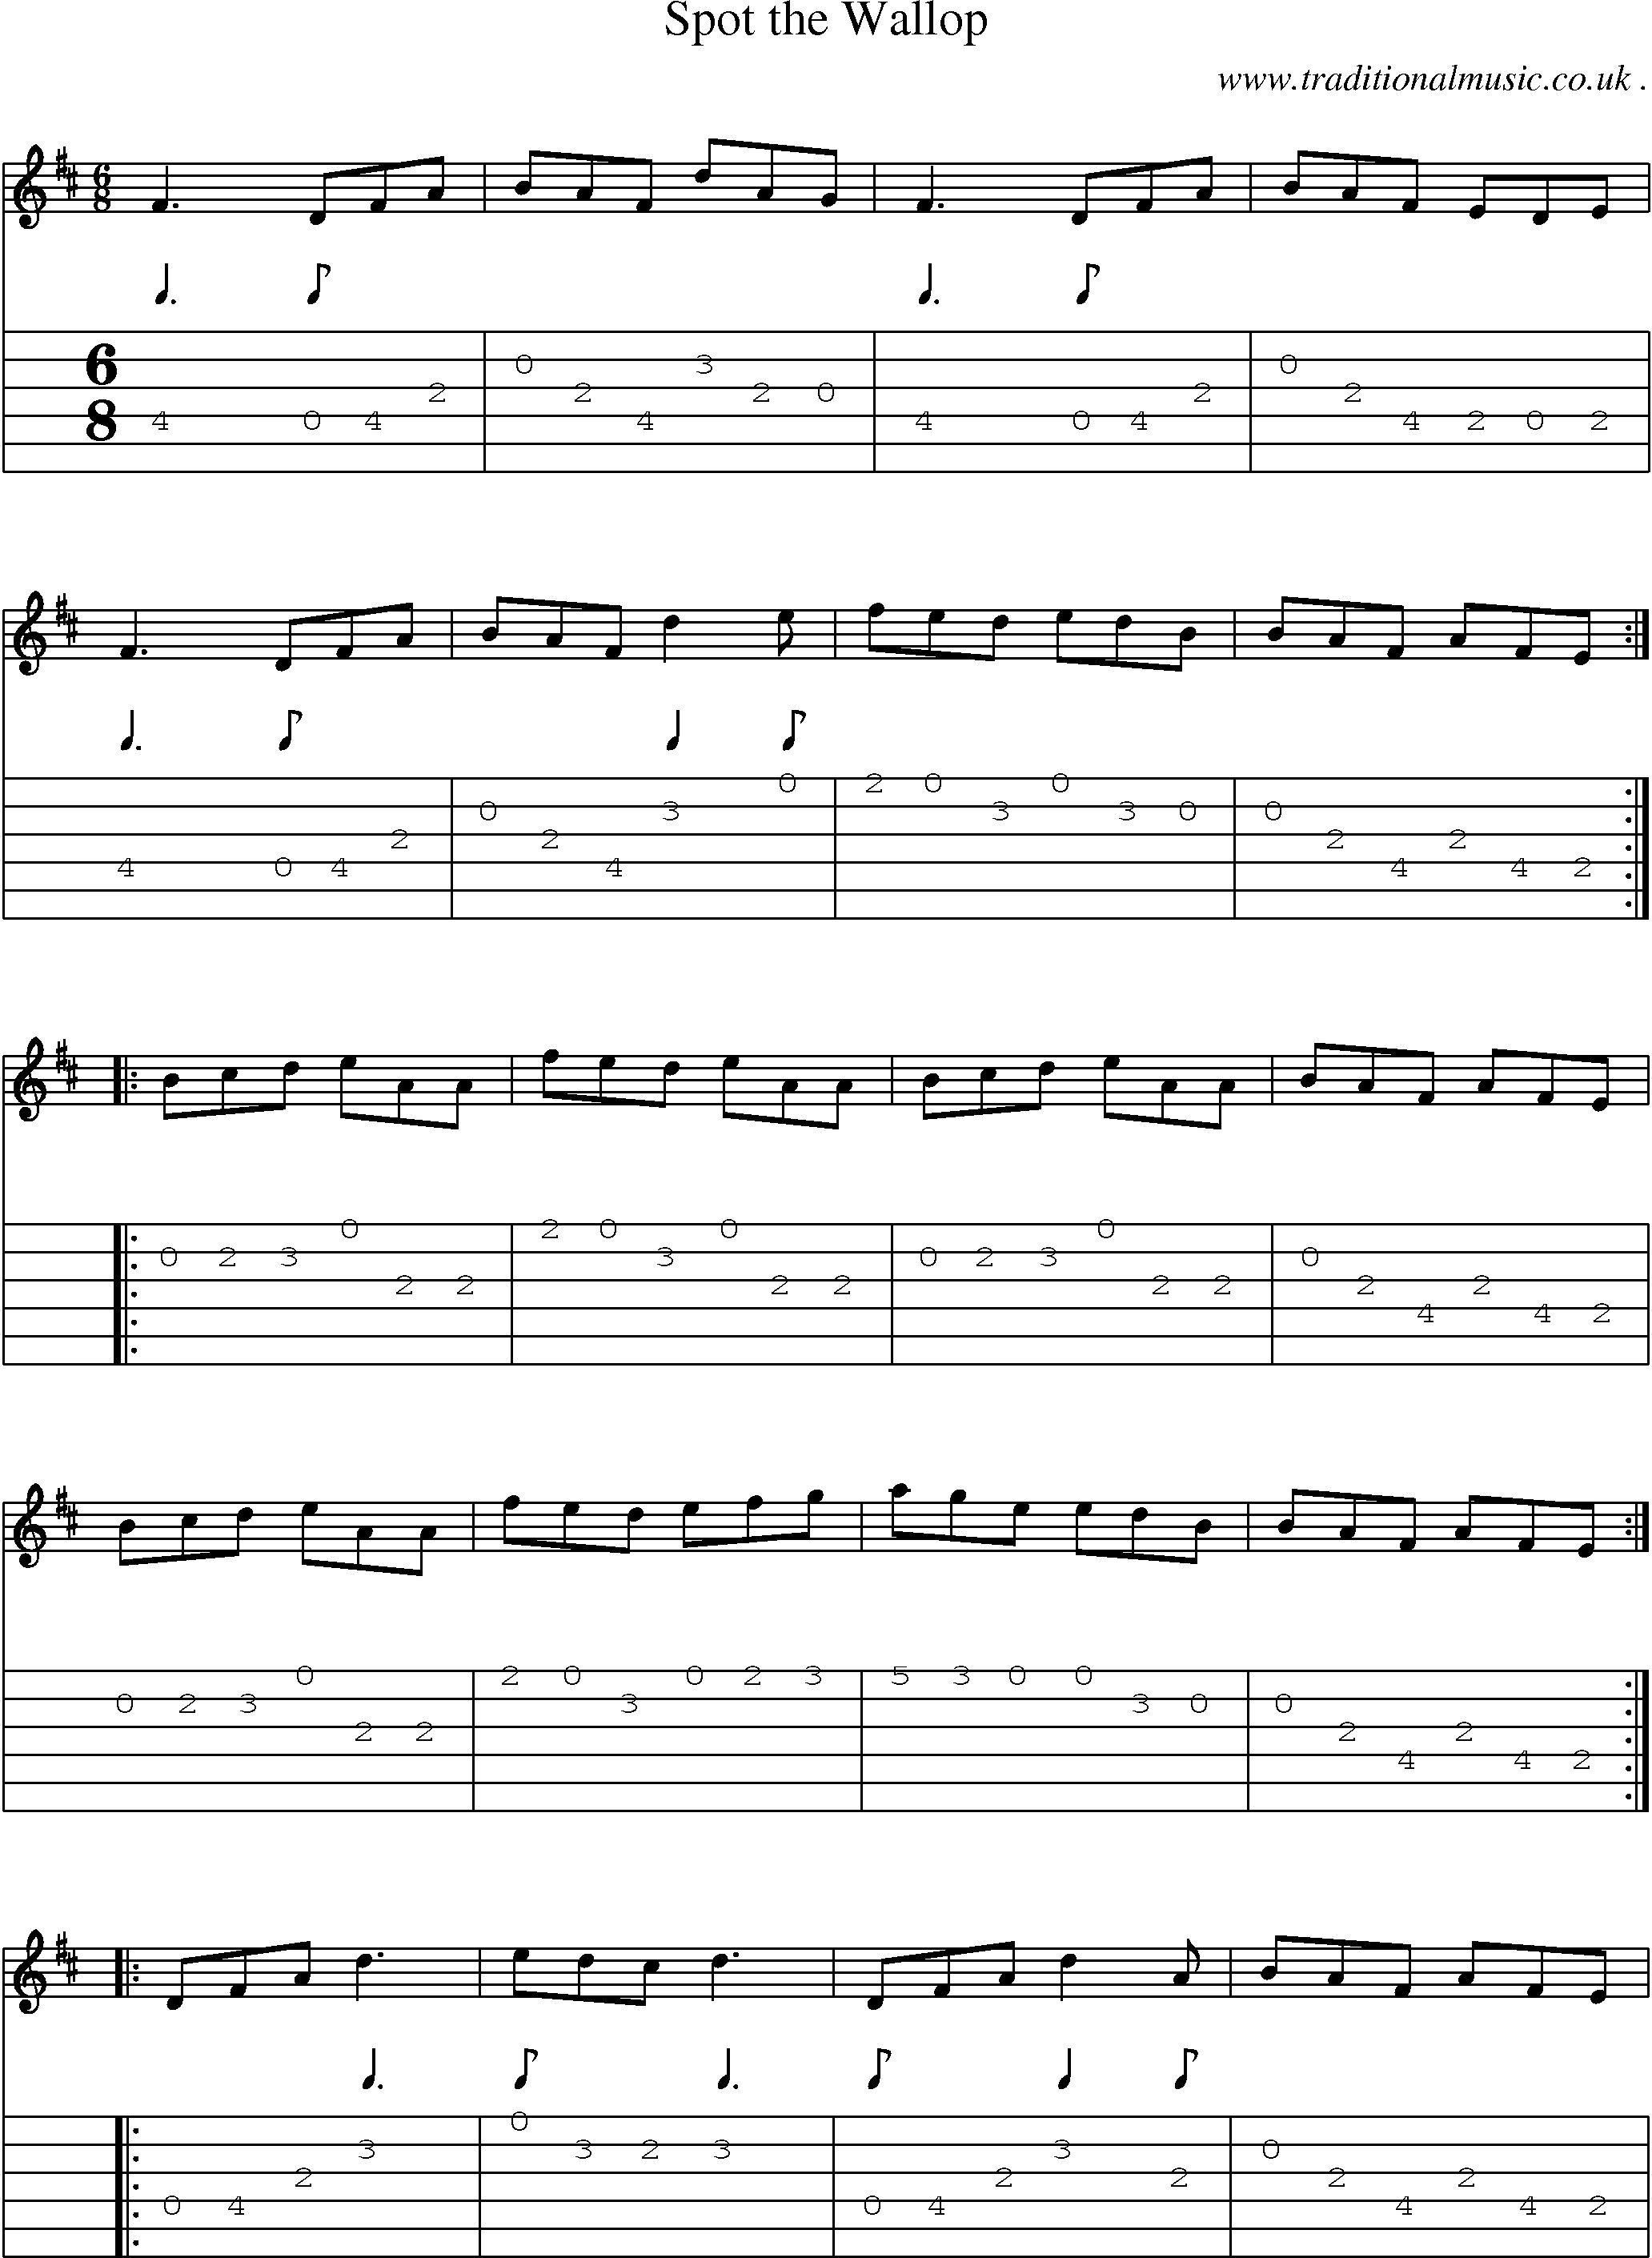 Sheet-Music and Guitar Tabs for Spot The Wallop